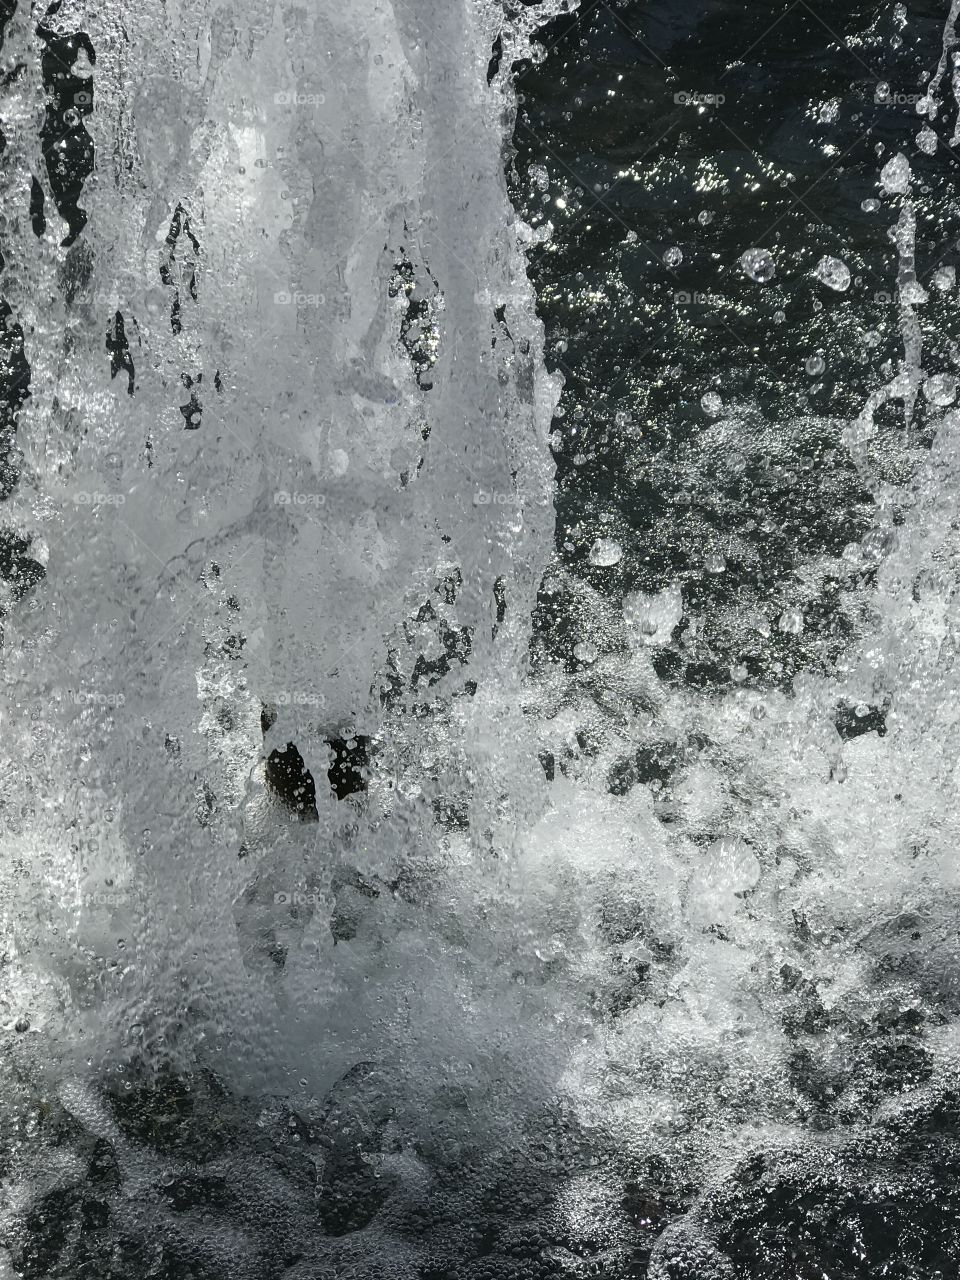 water in motion 3